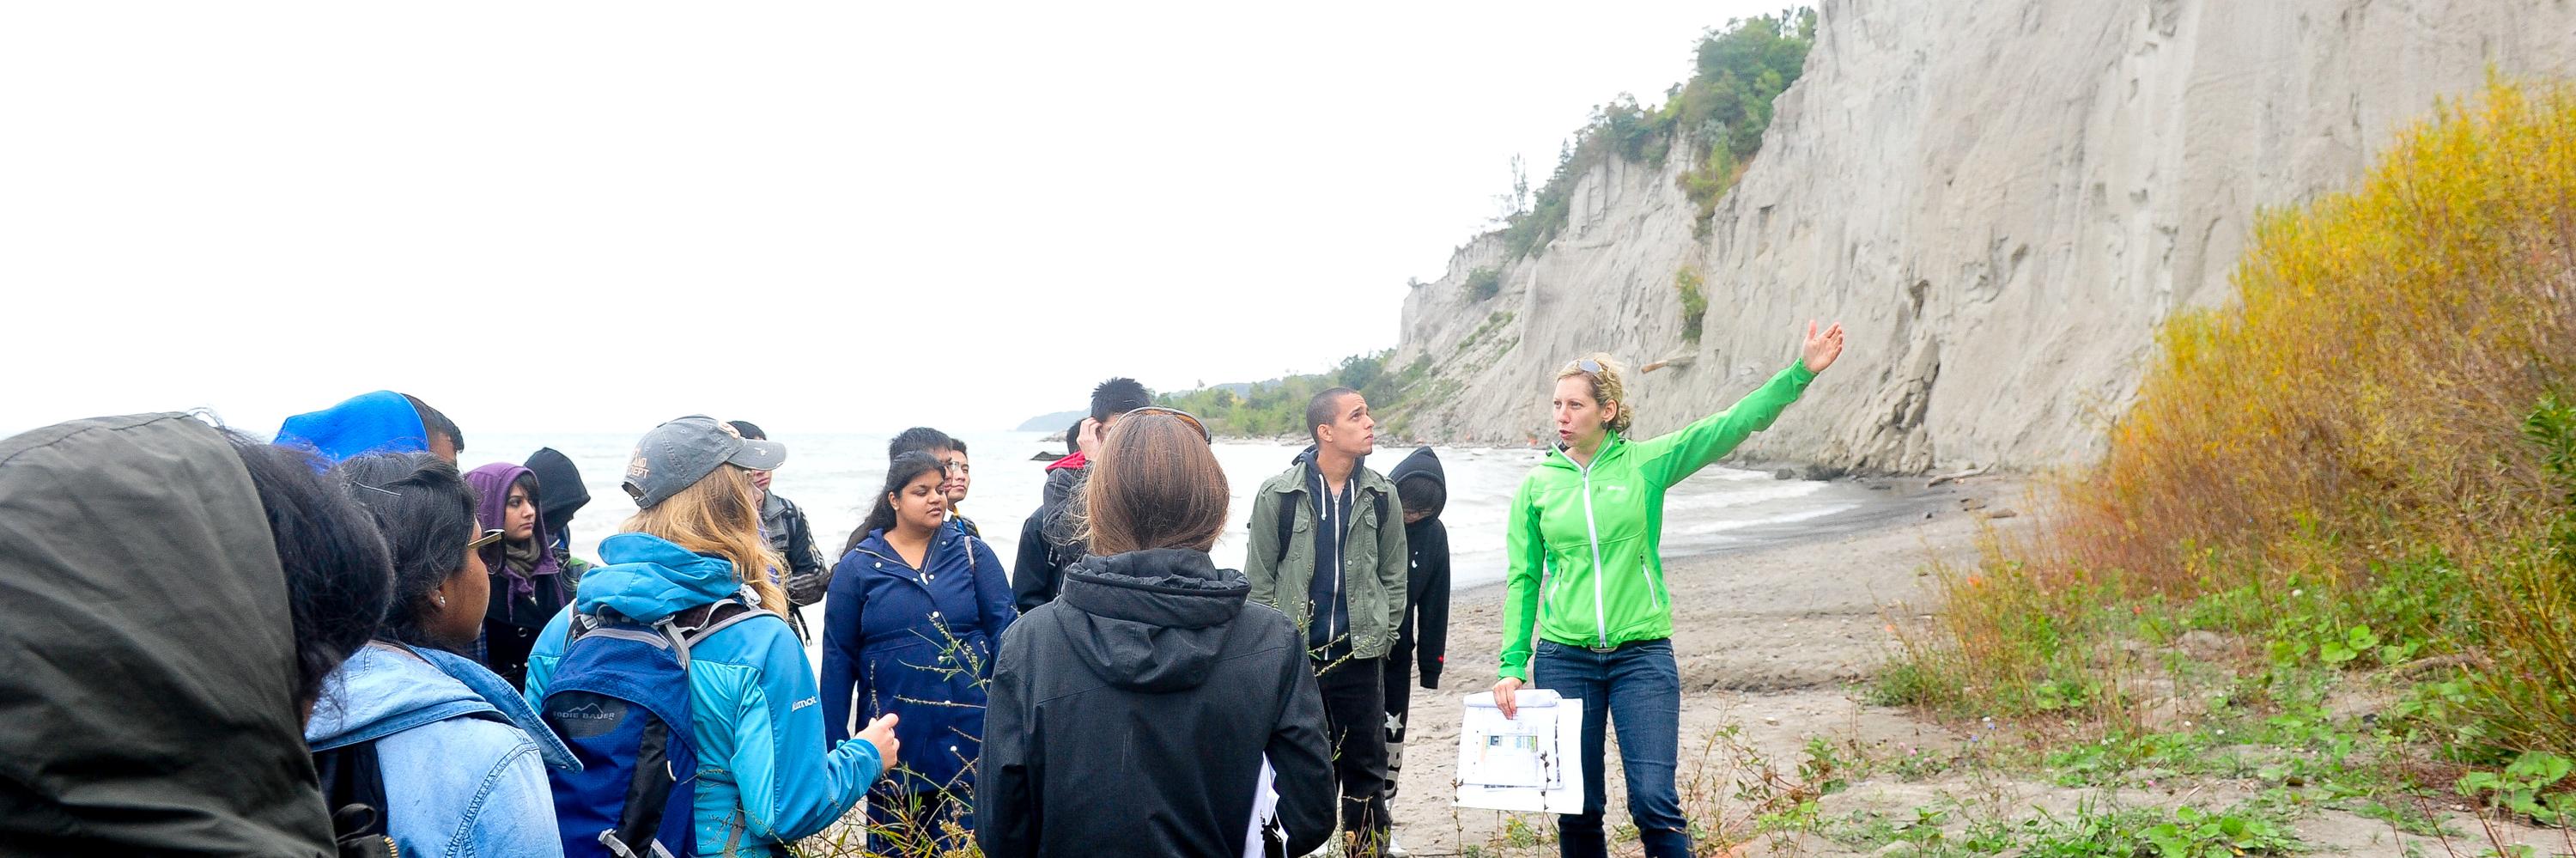 A professor speaks with students on a field trip to the Scarborough Bluffs, seen in the background